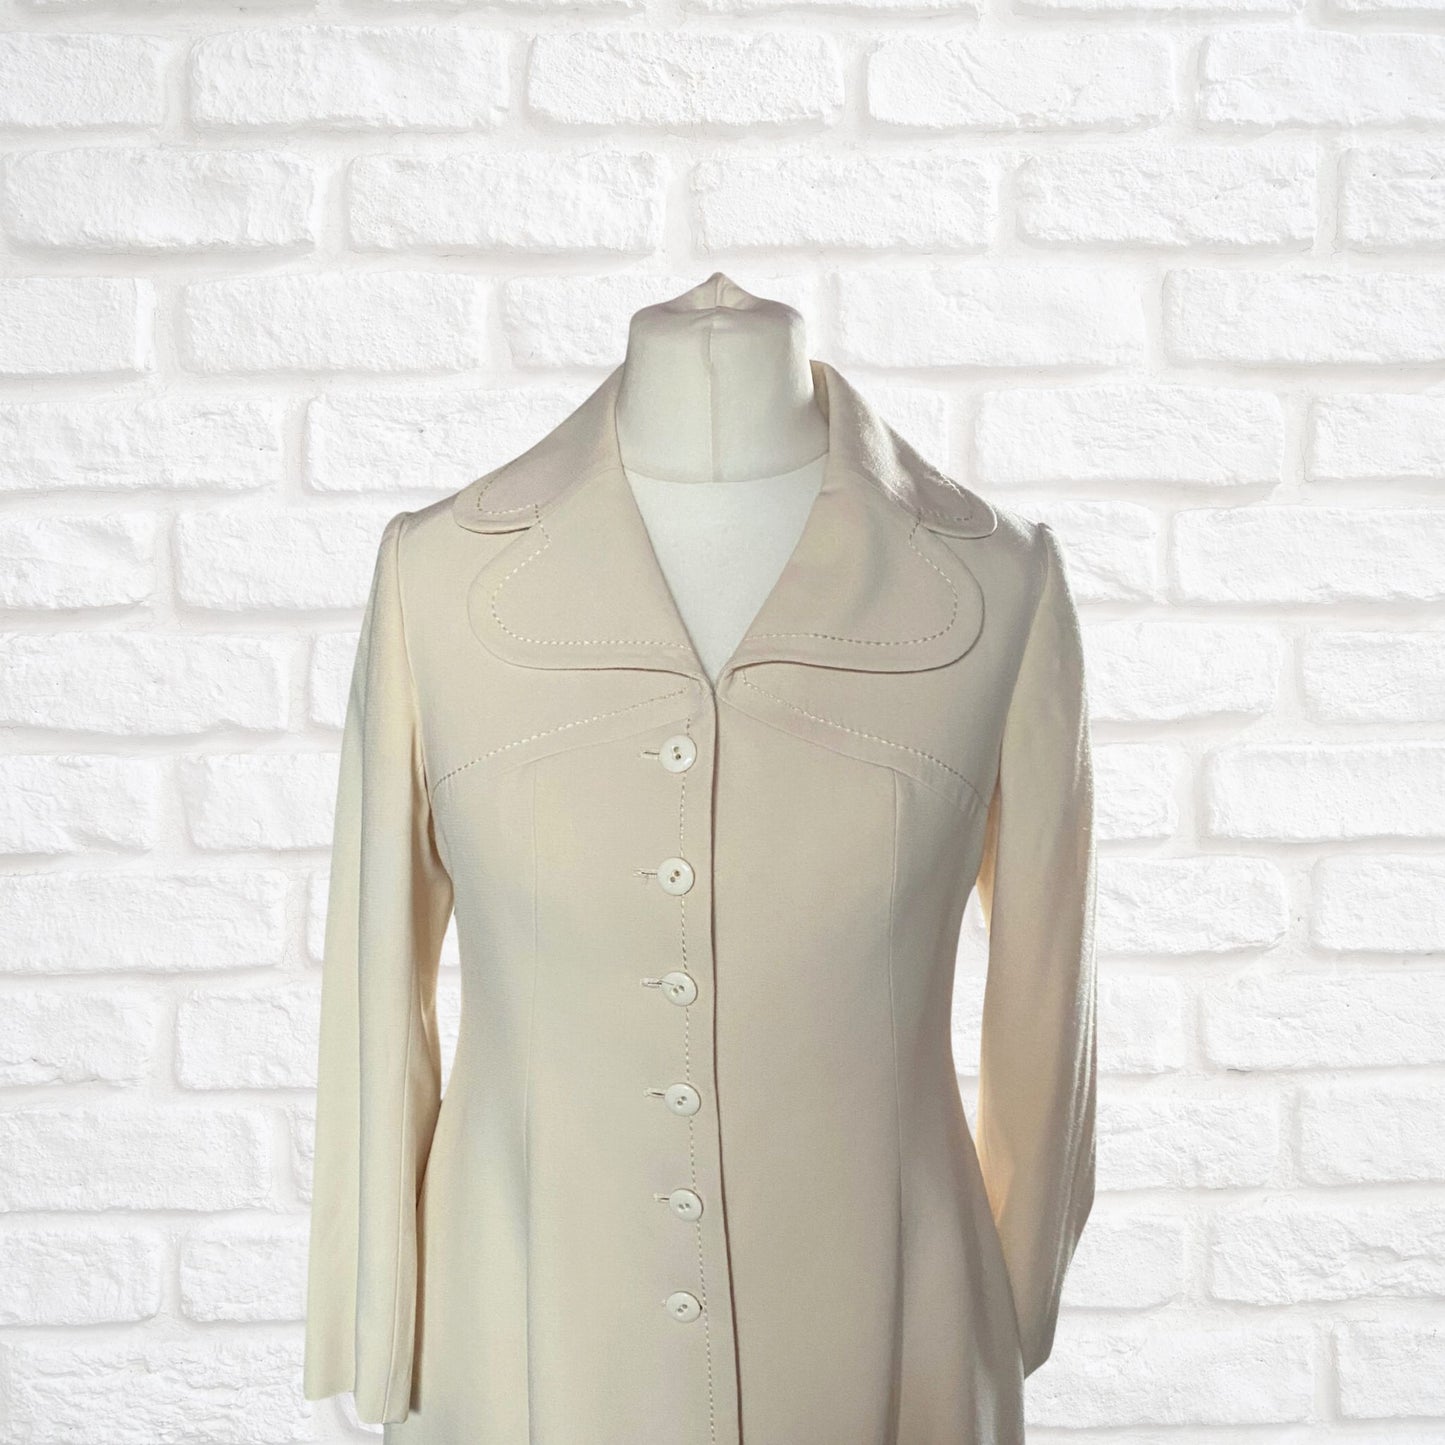 Vintage Creamy White Lightweight 60s Mod Coat with Rounded Collar . Approx UK size 10-12